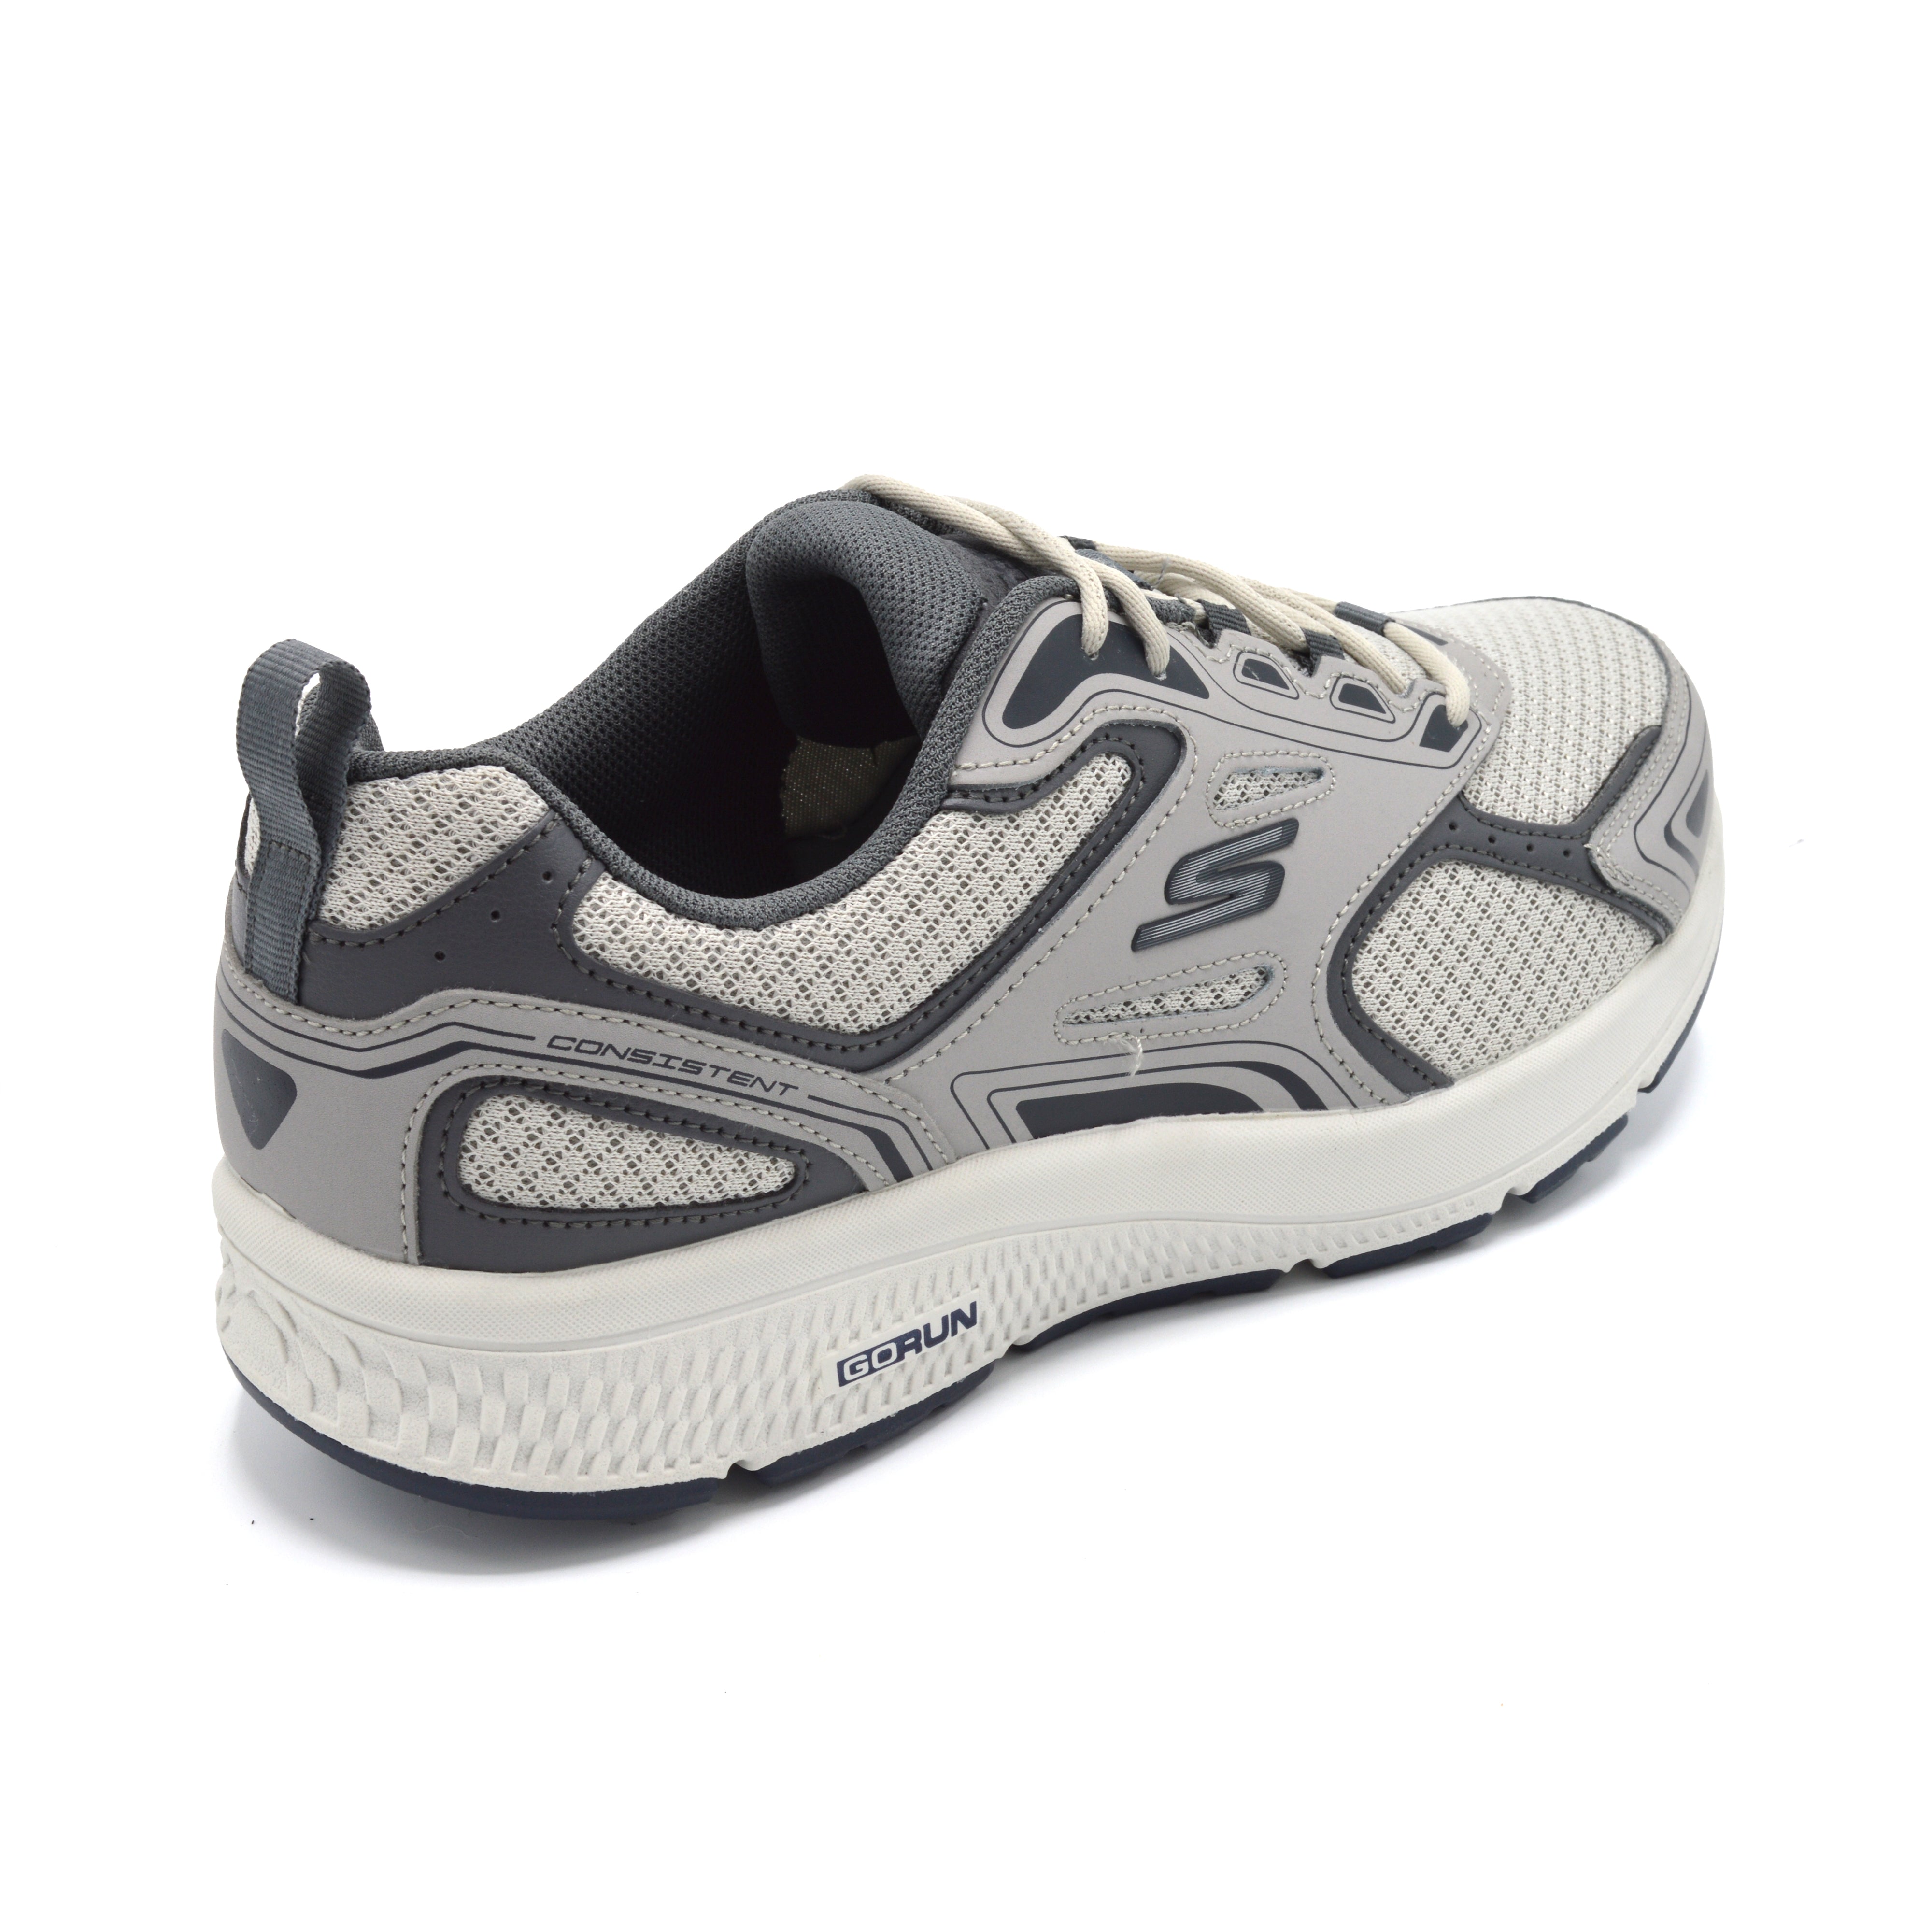 Skechers Go Run Consistent - Mens Wide Fit Trainer - 4E Fitting - Grey